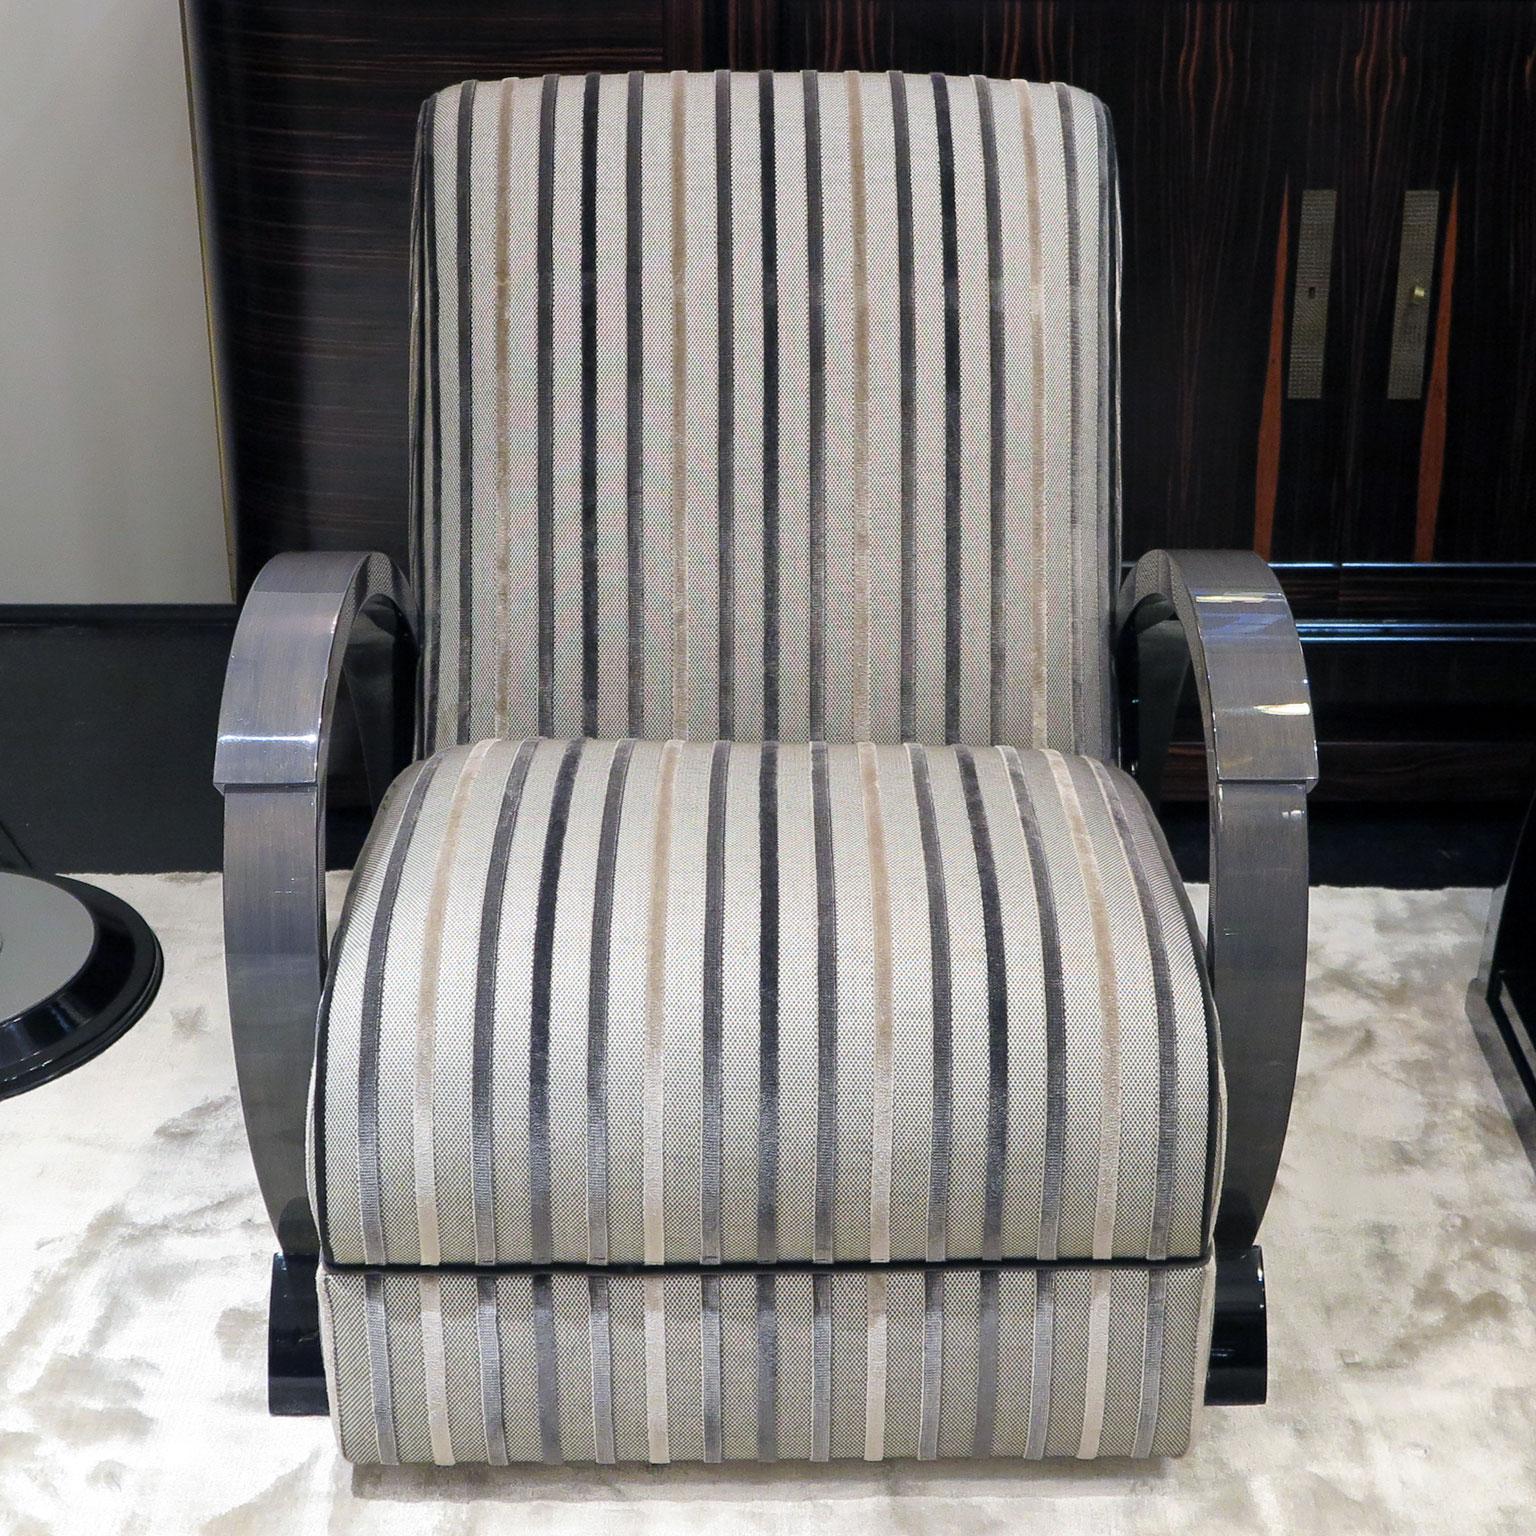 Pair of Classic Art Deco style chairs from our custom Anne Hauck Collection line. Shown here with the top of arms in grey maple with the rest of the frame in black lacquer, all with a high gloss finish. These lounge chairs are upholstered in a